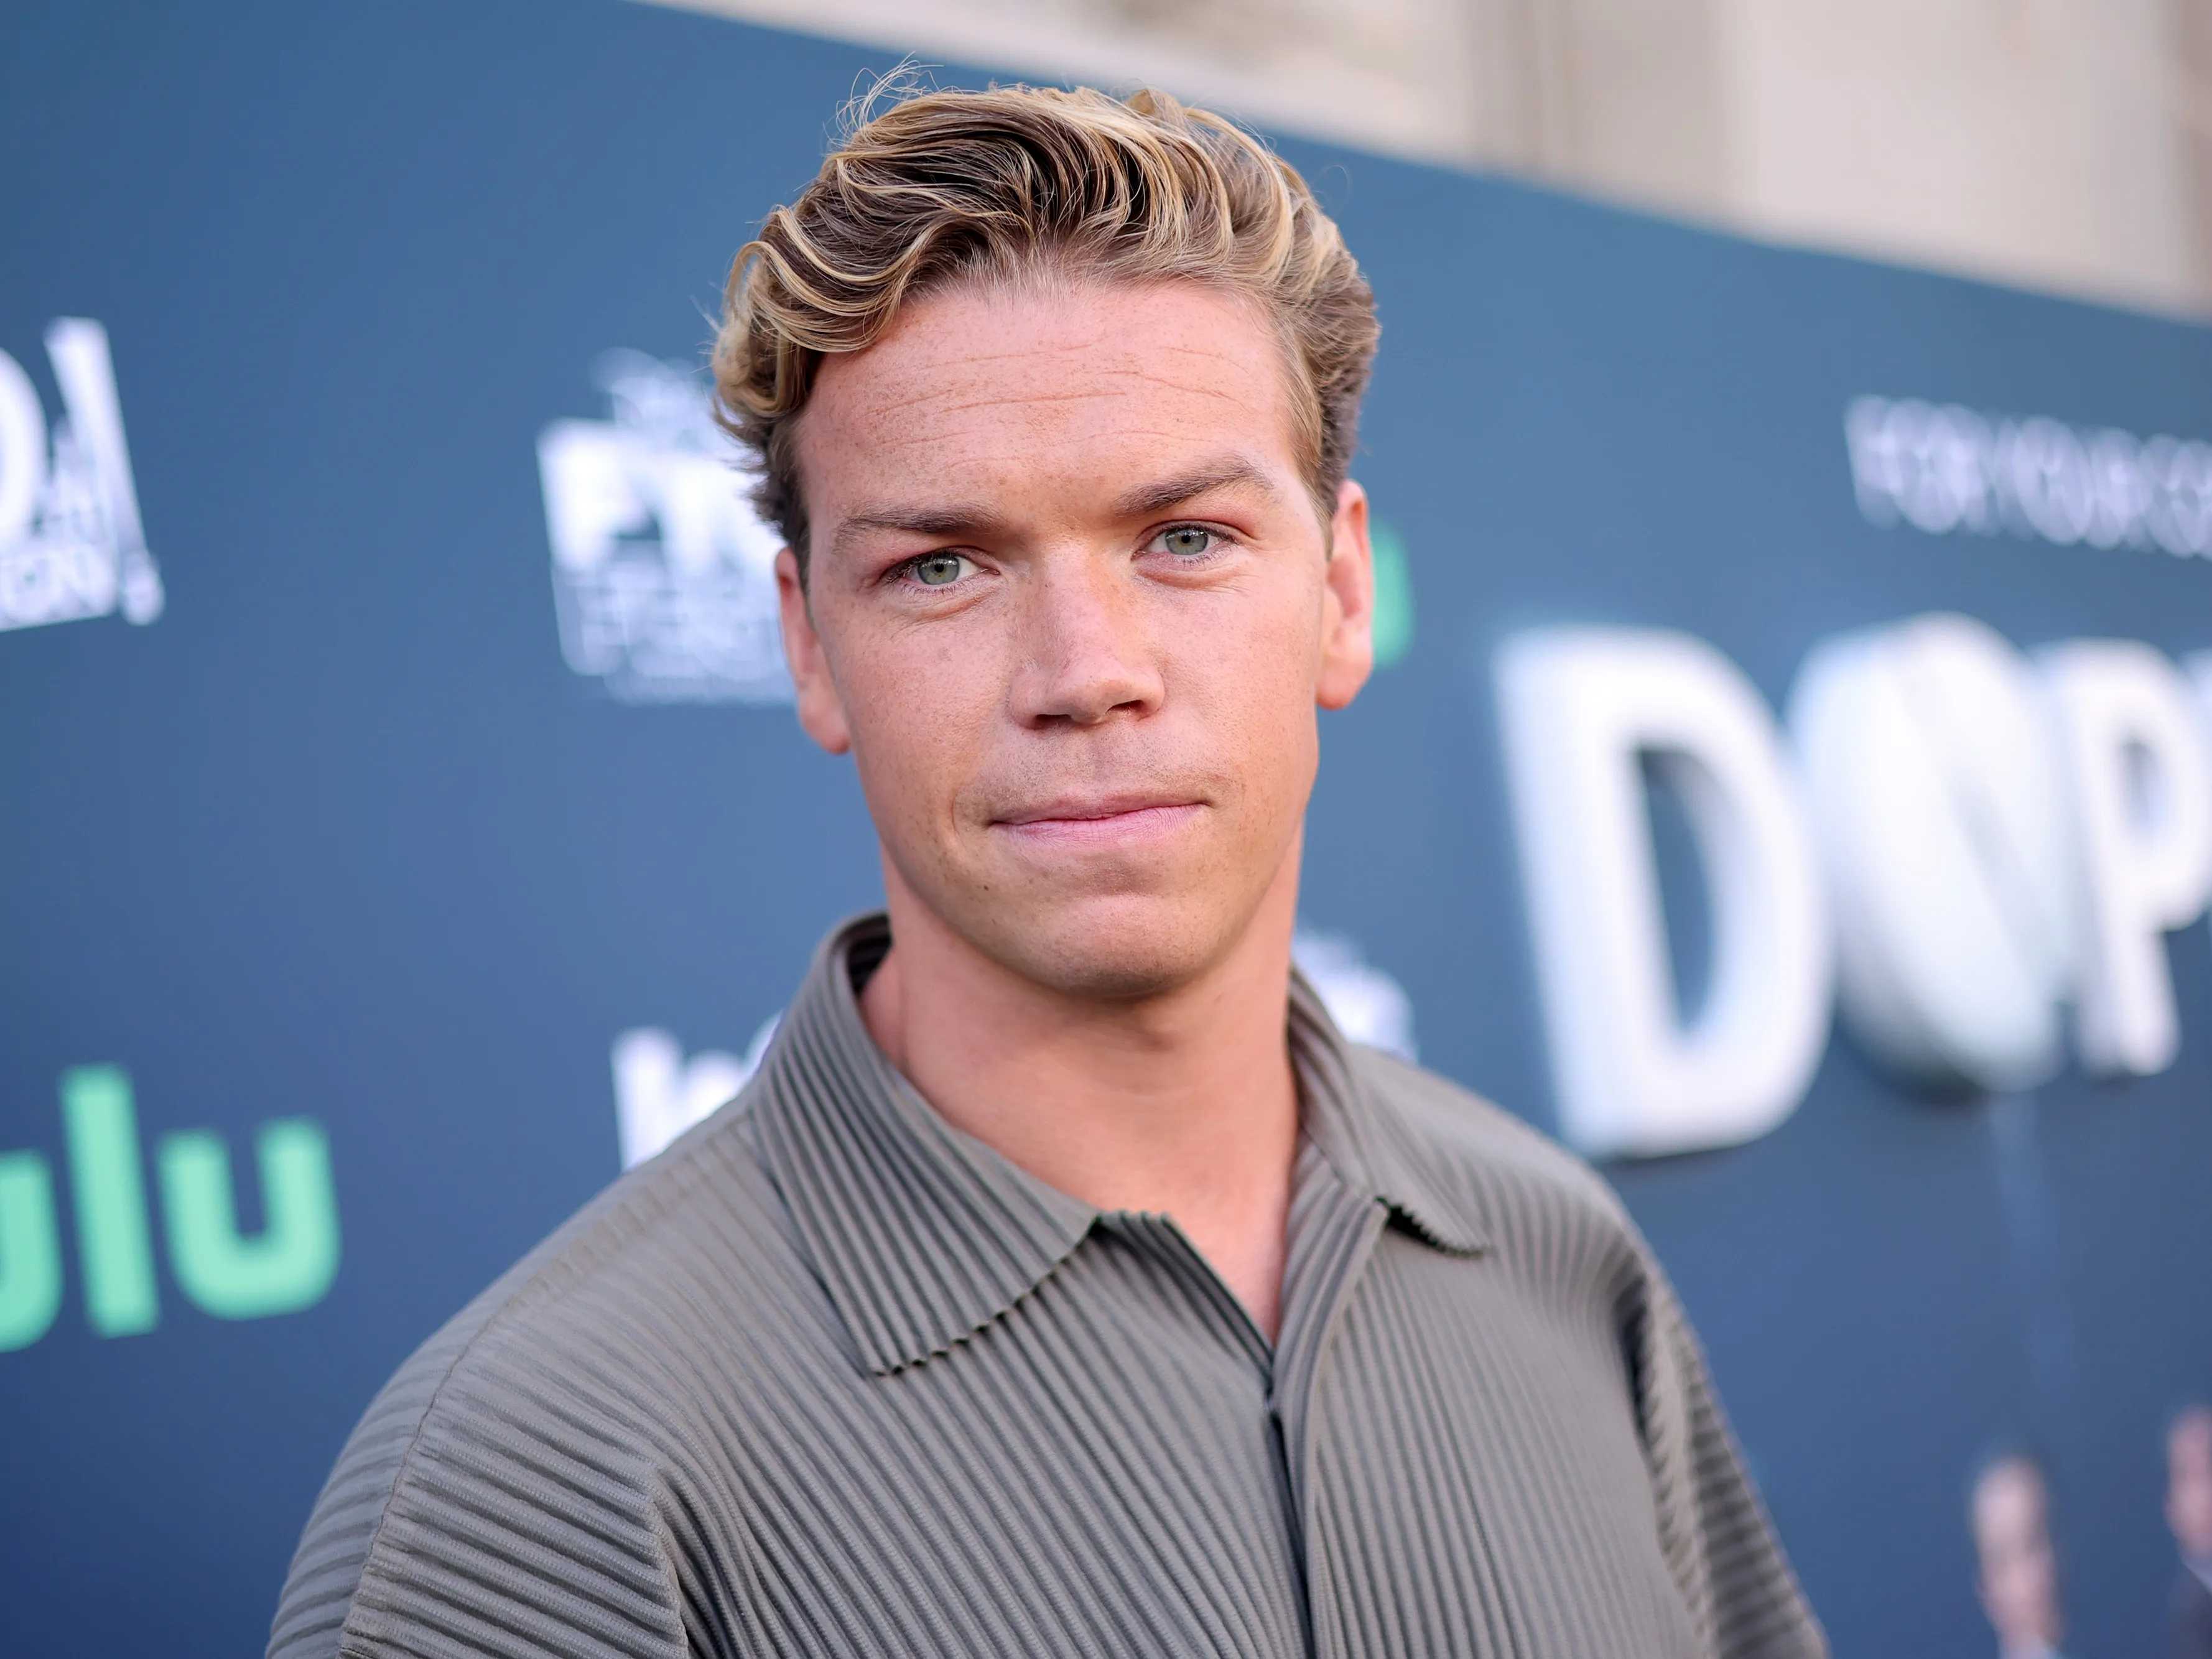 Will Poulter's shocking take on method acting: A trend or toxicity?